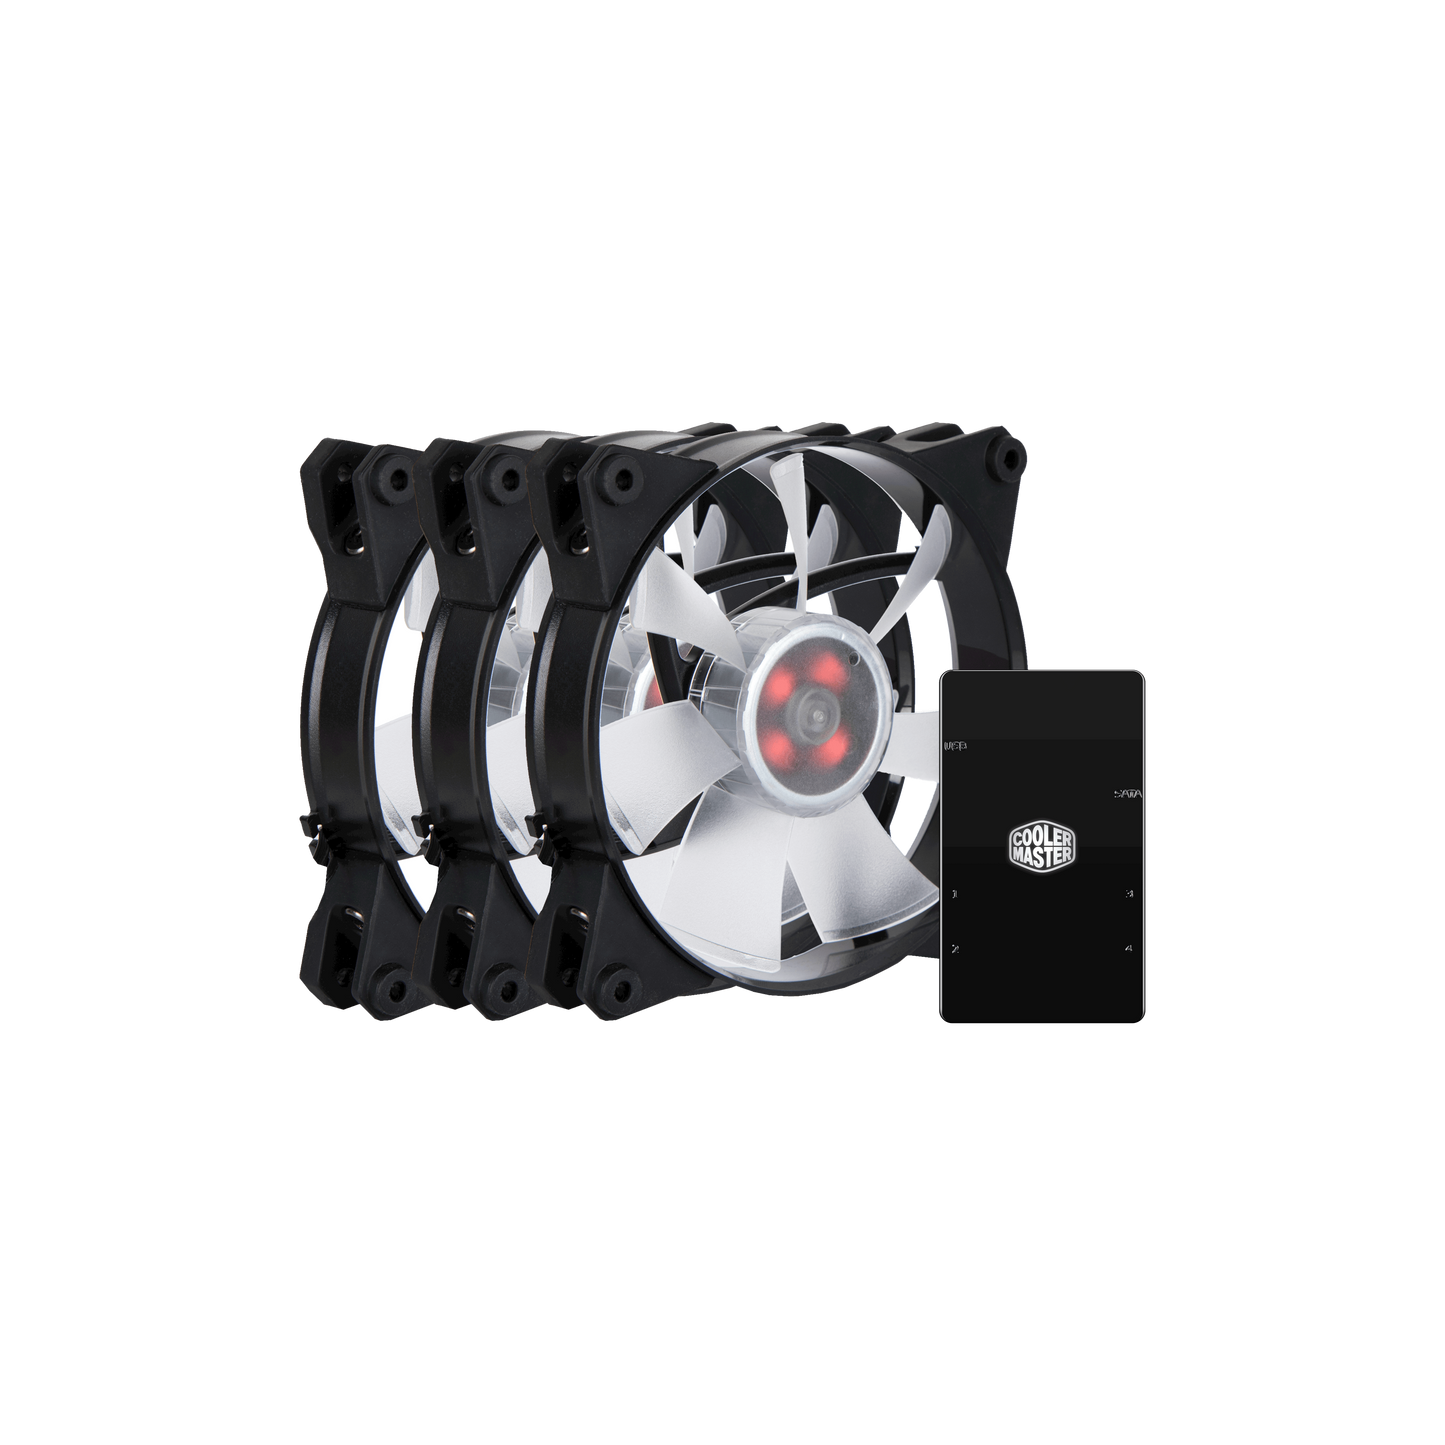 MasterFan Pro 120 Air Flow RGB 3-in-1 Kit with RGB Controller